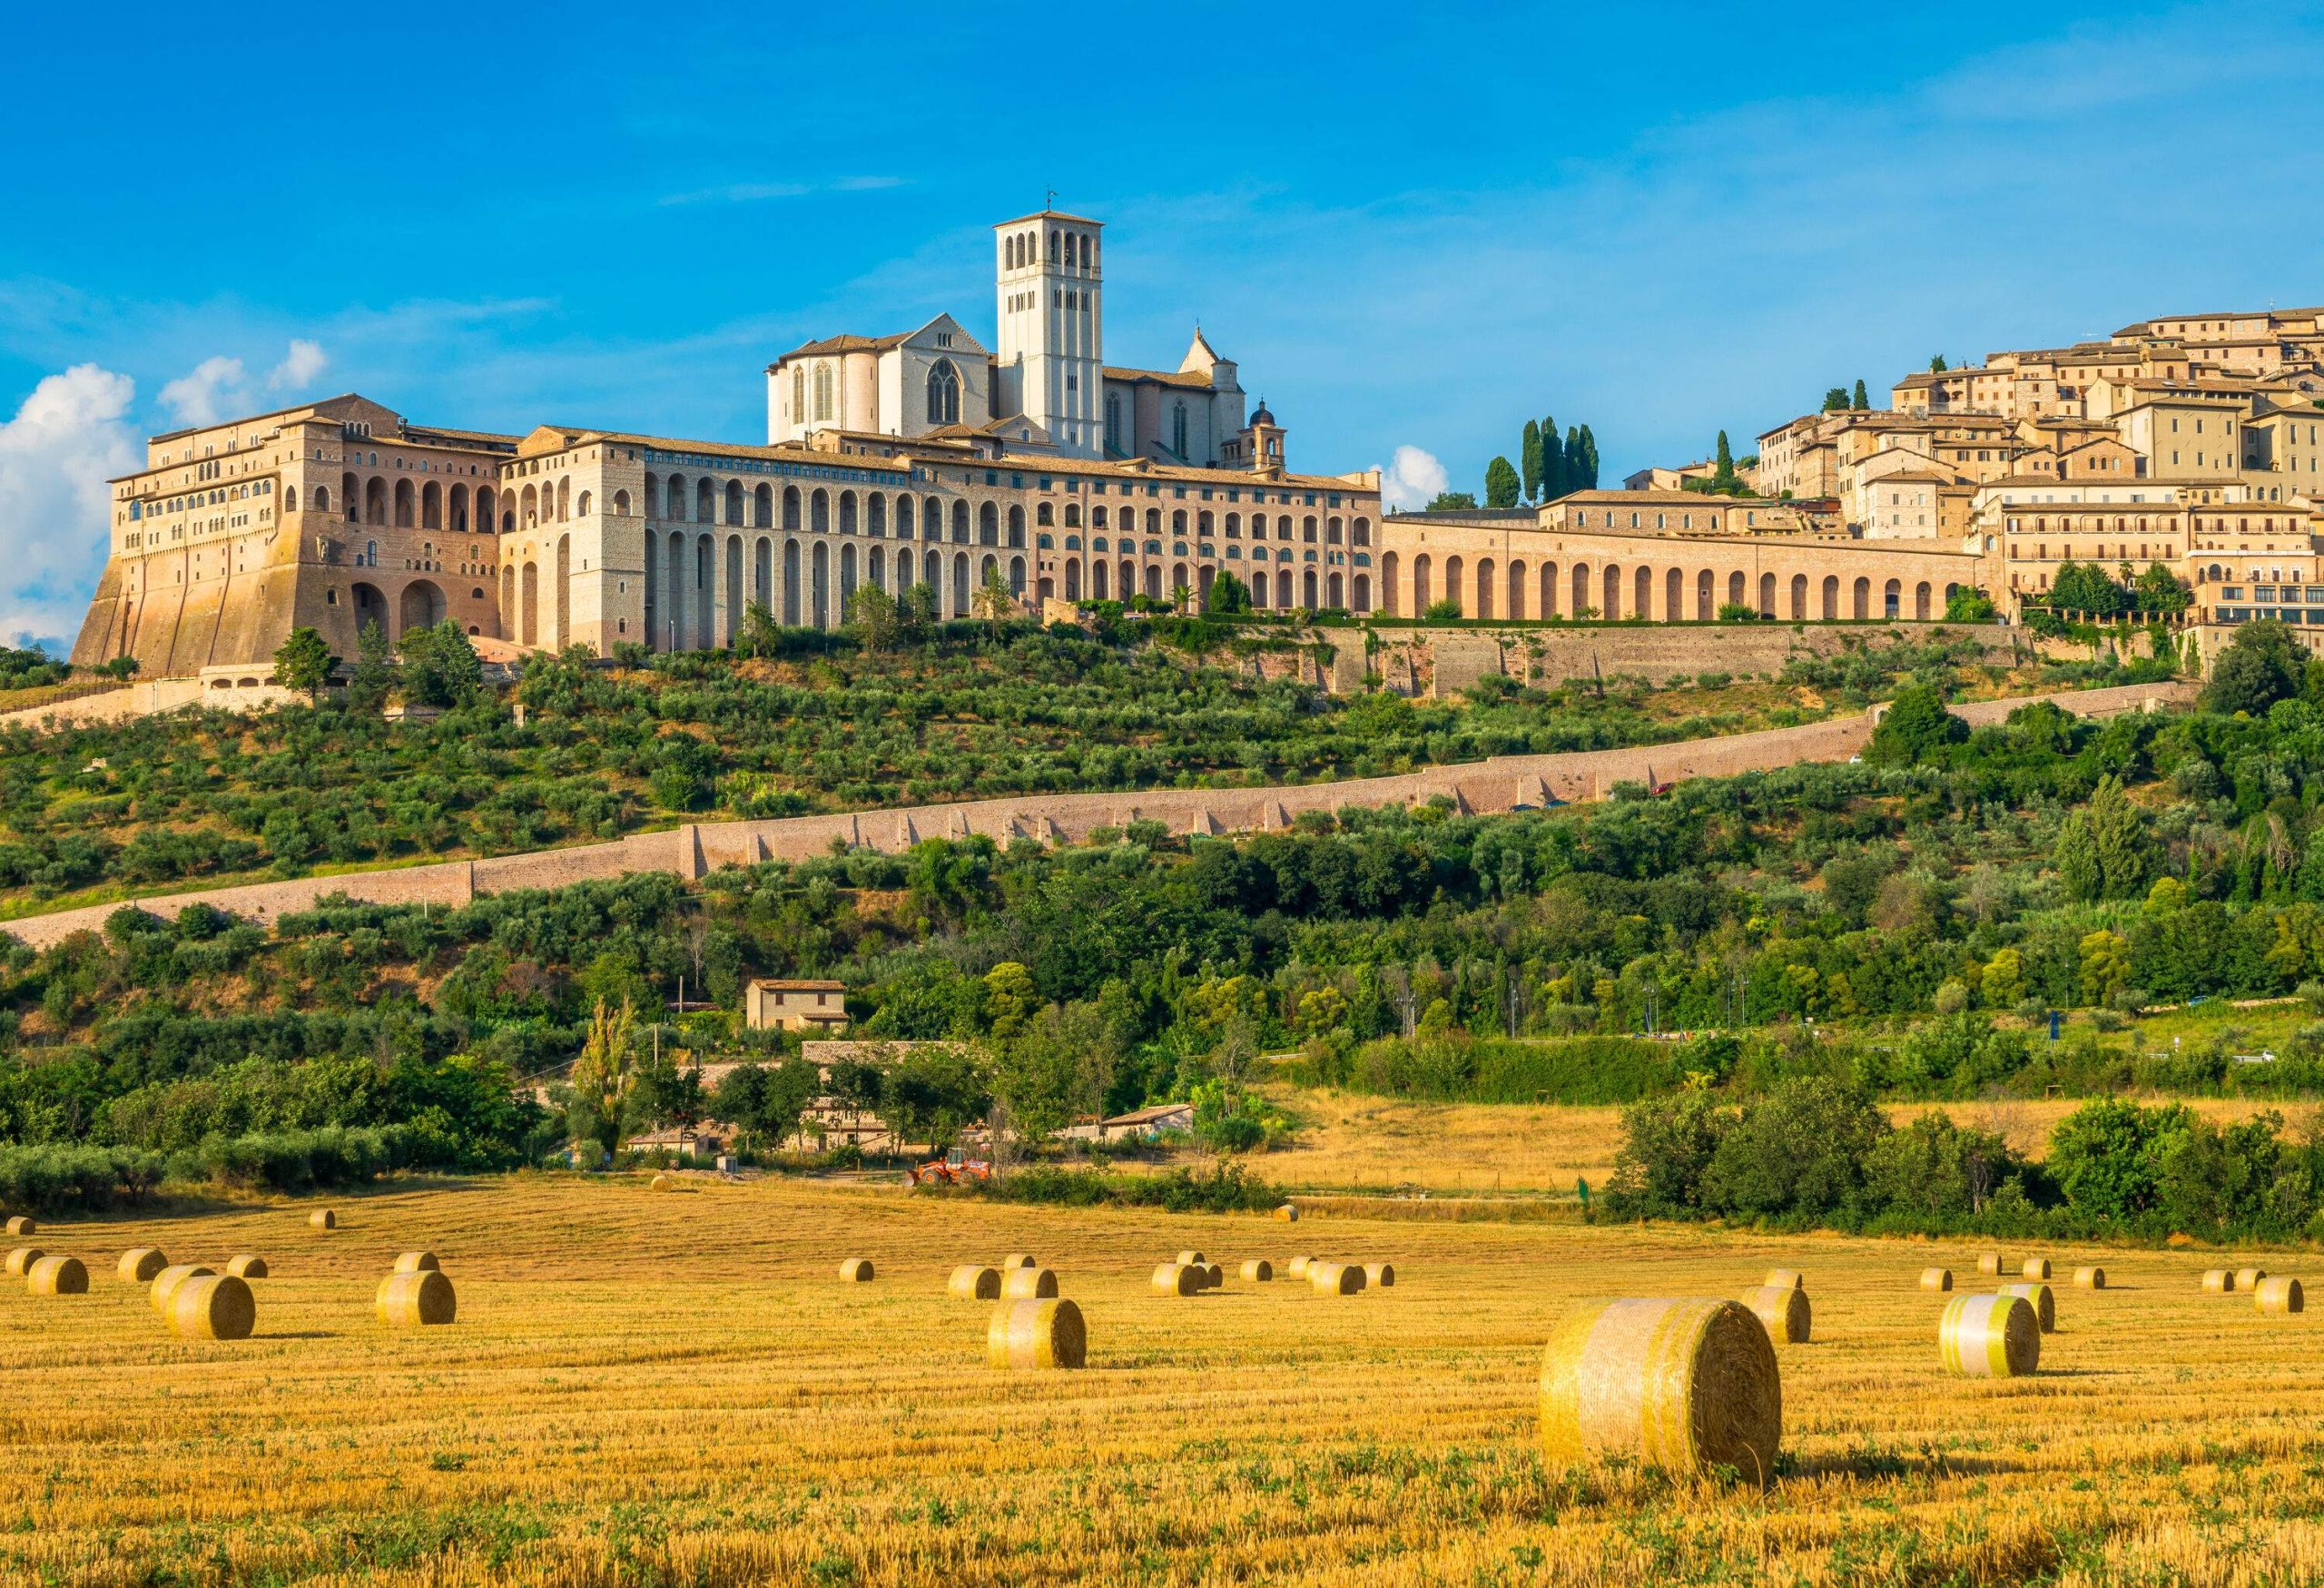 The majestic Basilica of Saint Francis and the town of Assisi overlooking a field strewn with hay bales.